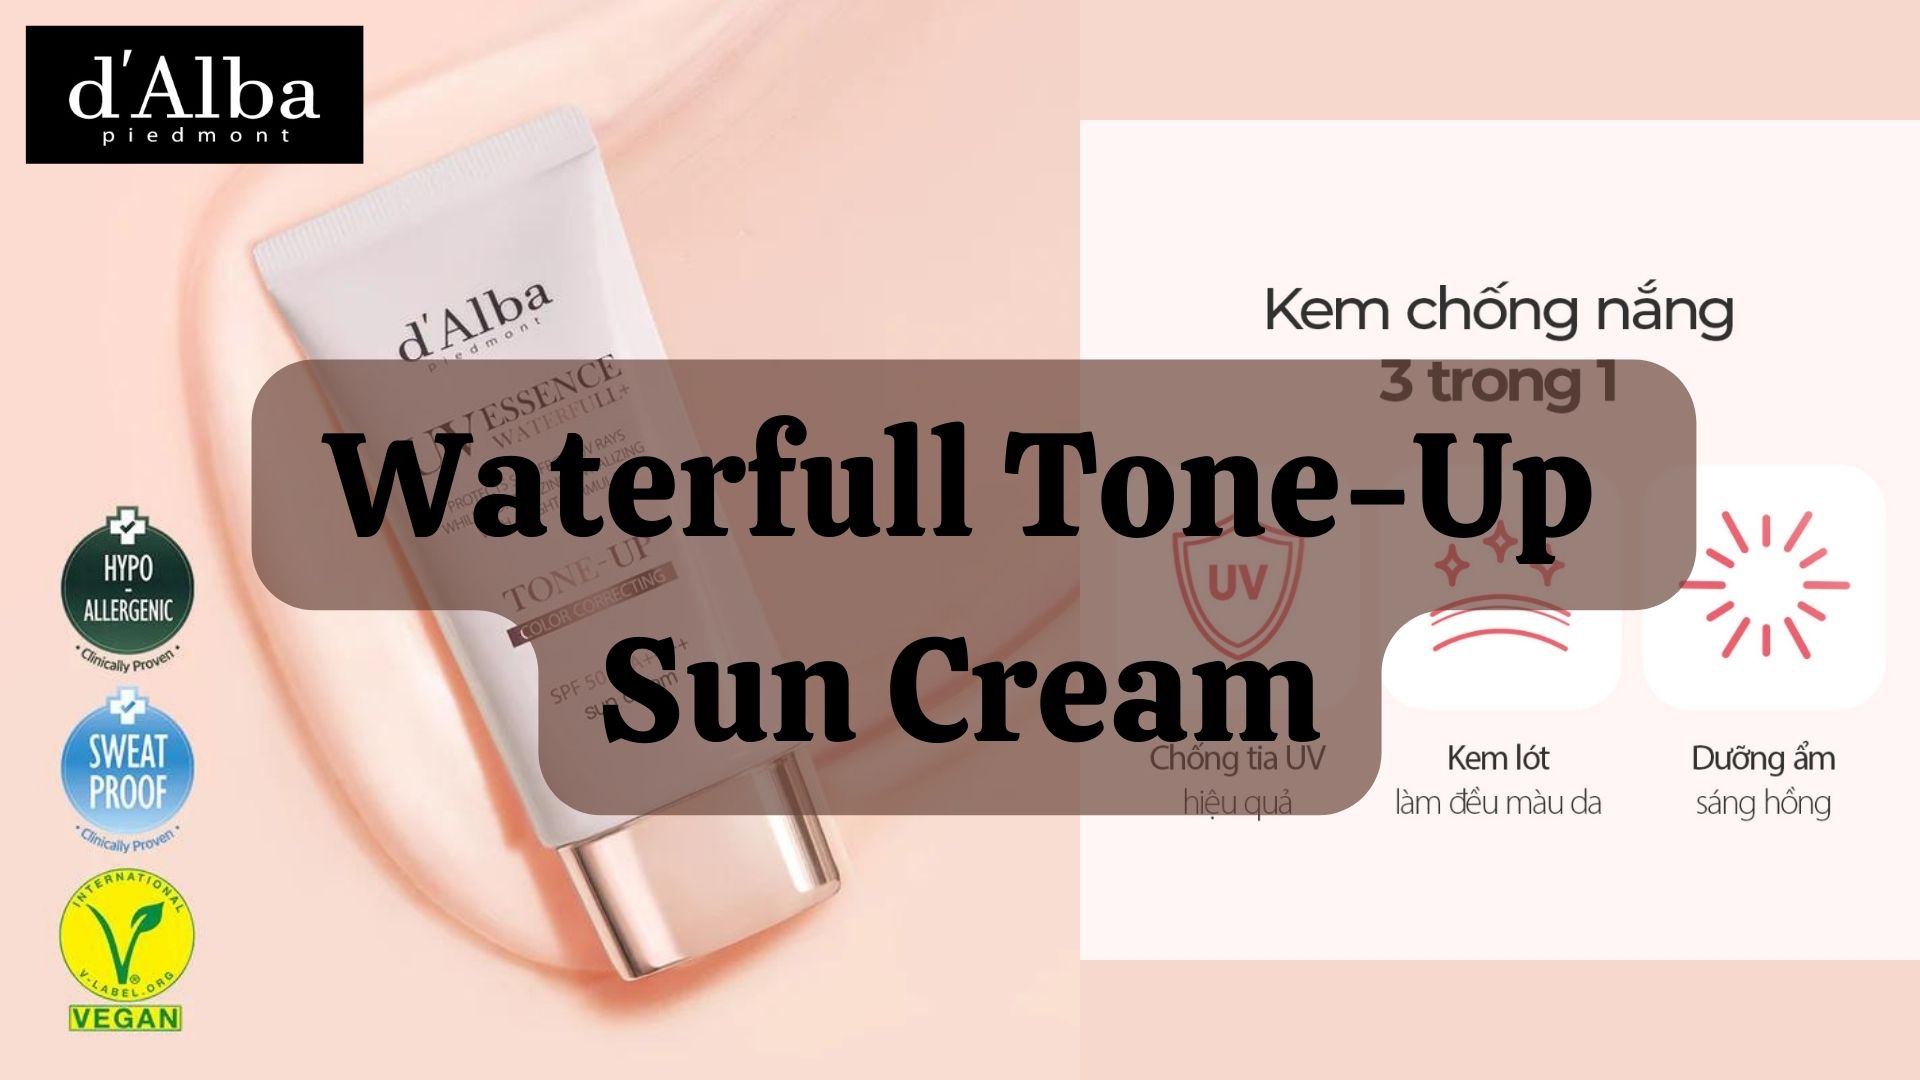 [Review] Kem Chống Nắng d'Alba Waterfull Tone-Up Sun Cream SPF50+PA++++ 9